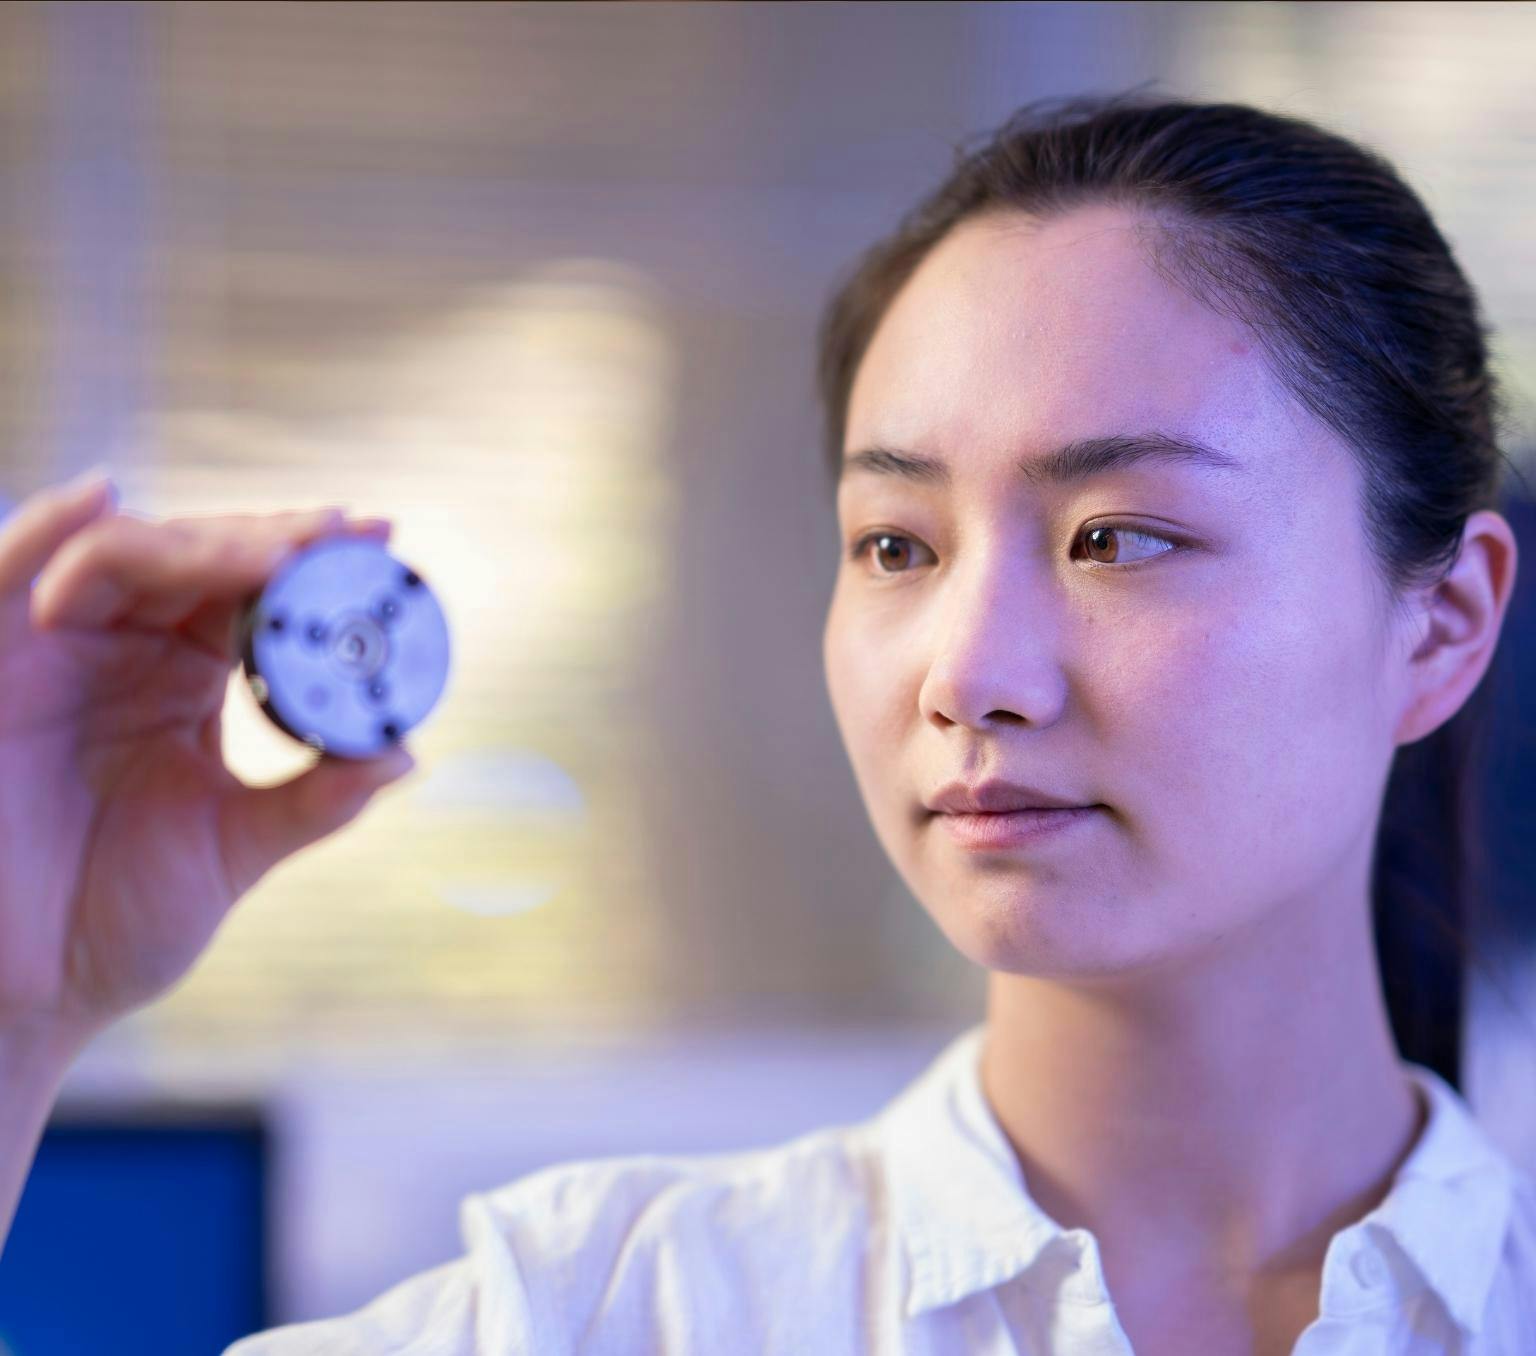 Xingshuo Huang looks at a small metal disc she is holding in her right hand.